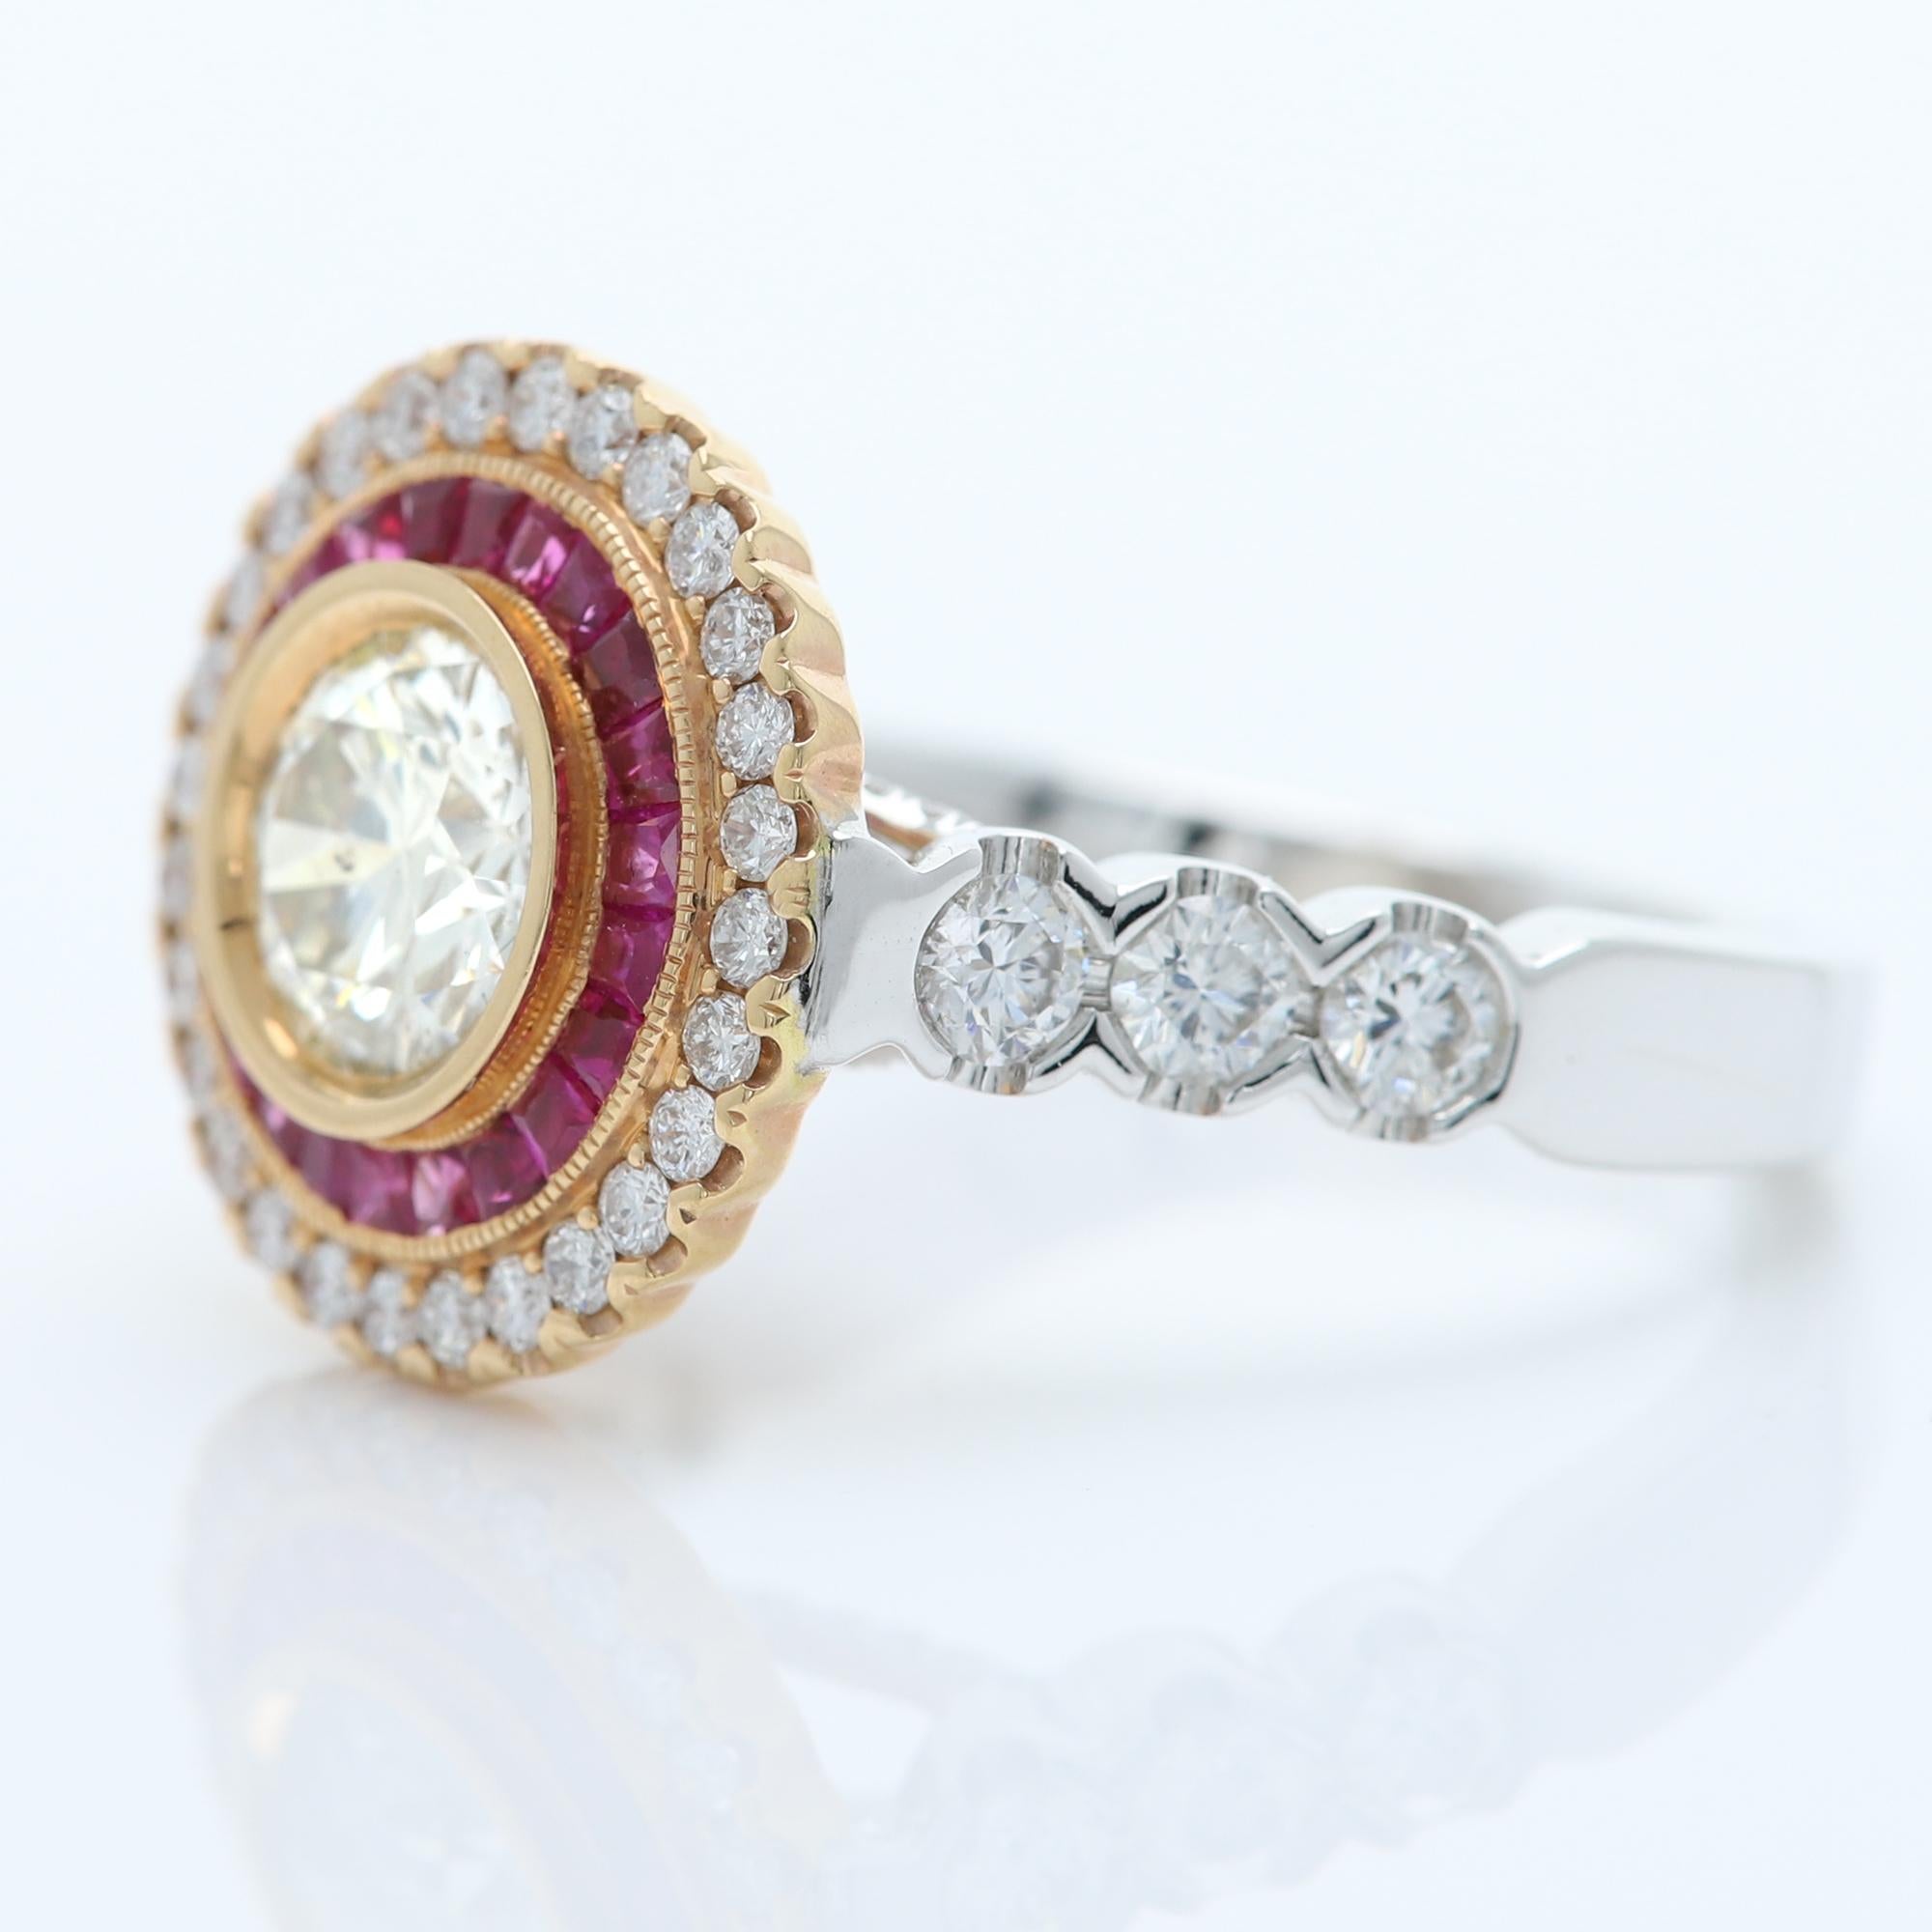 Art Deco Style Colorful Ring - Impressive and Bold
Center is Diamond surrounded with Red Ruby, sides have regular white Diamonds
All stones are Natural
18k White & Yellow Gold  8.60 grams
Center Diamond size - 1.09 carat Round Shape (7mm) Brilliant